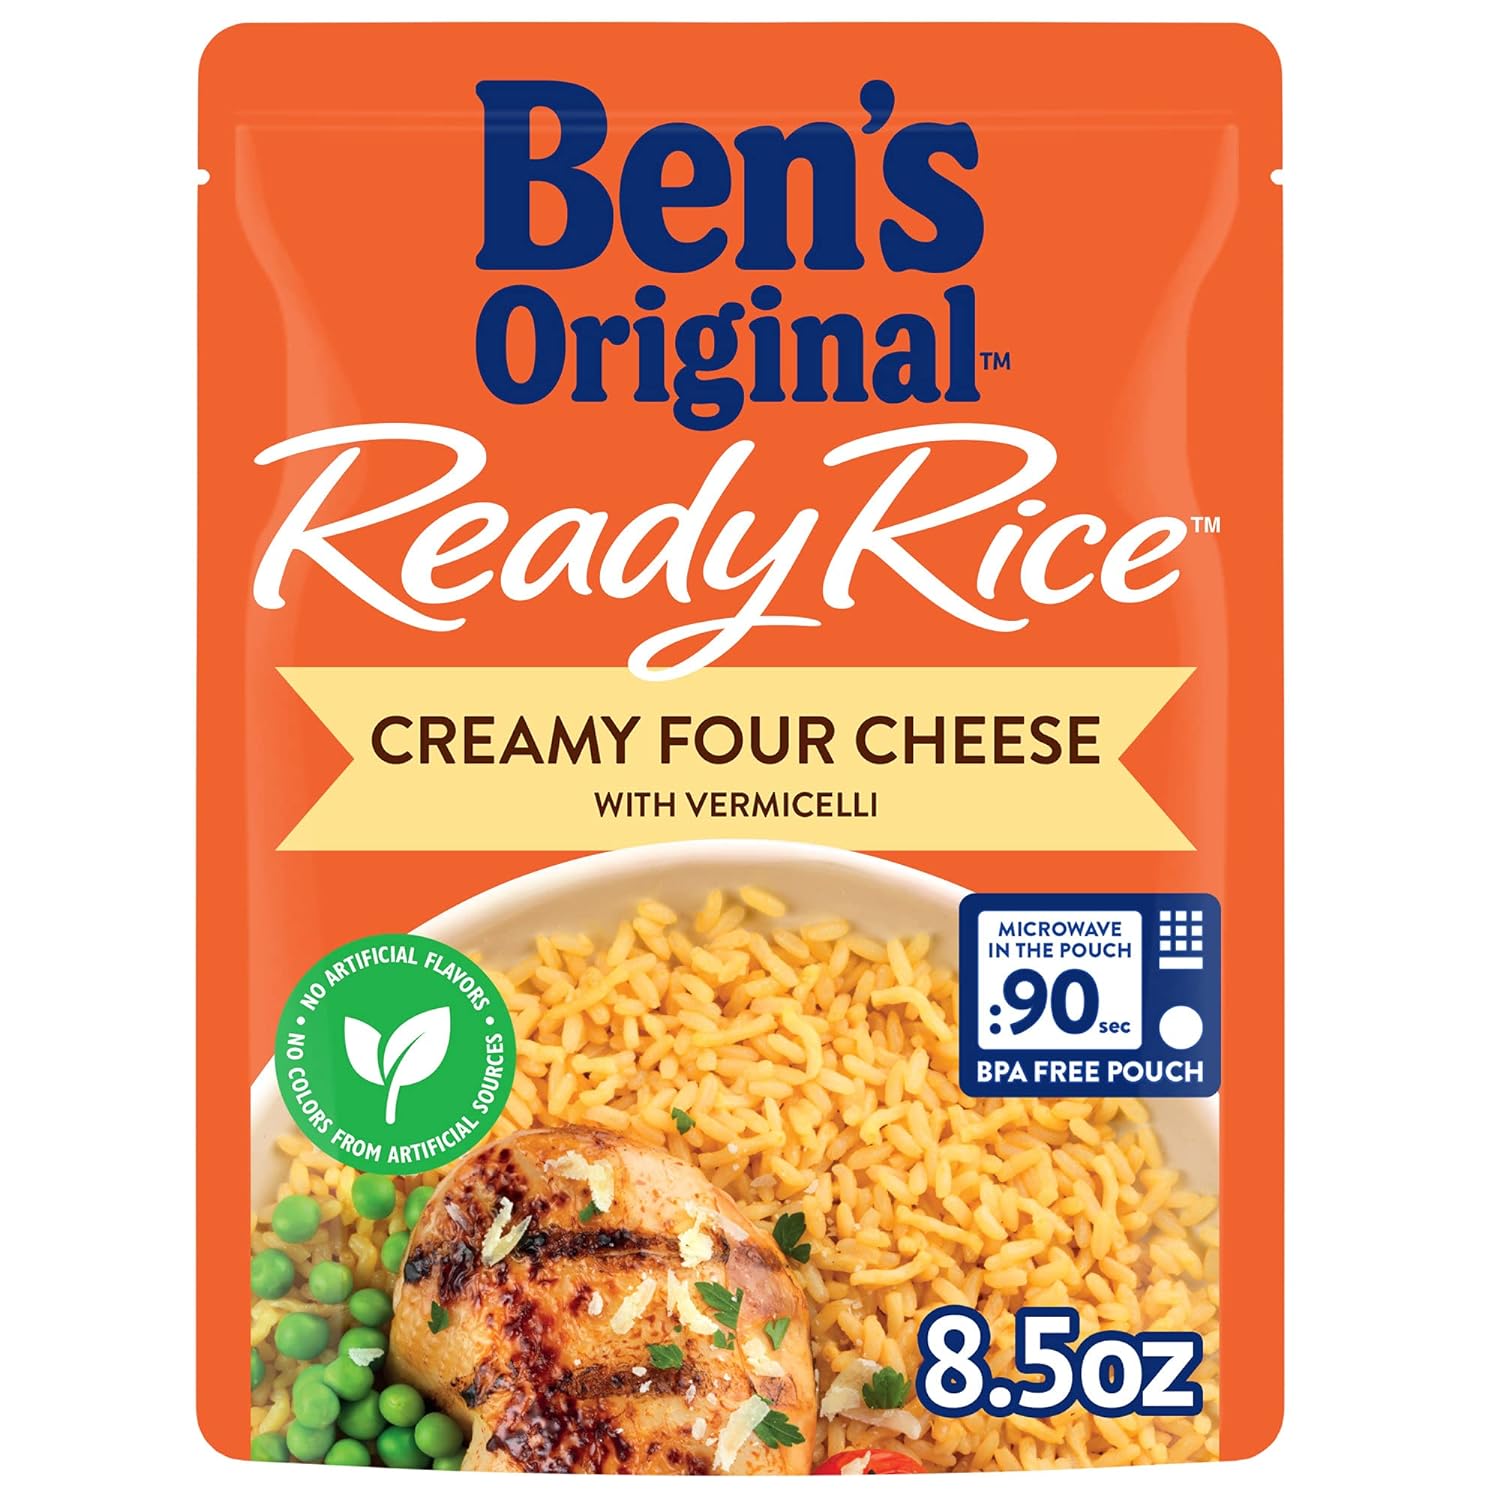 BEN'S ORIGINAL Ready Rice Creamy Four Cheese Flavored Rice, Easy Dinner Side, 8.5 OZ Pouch (Pack of 12)